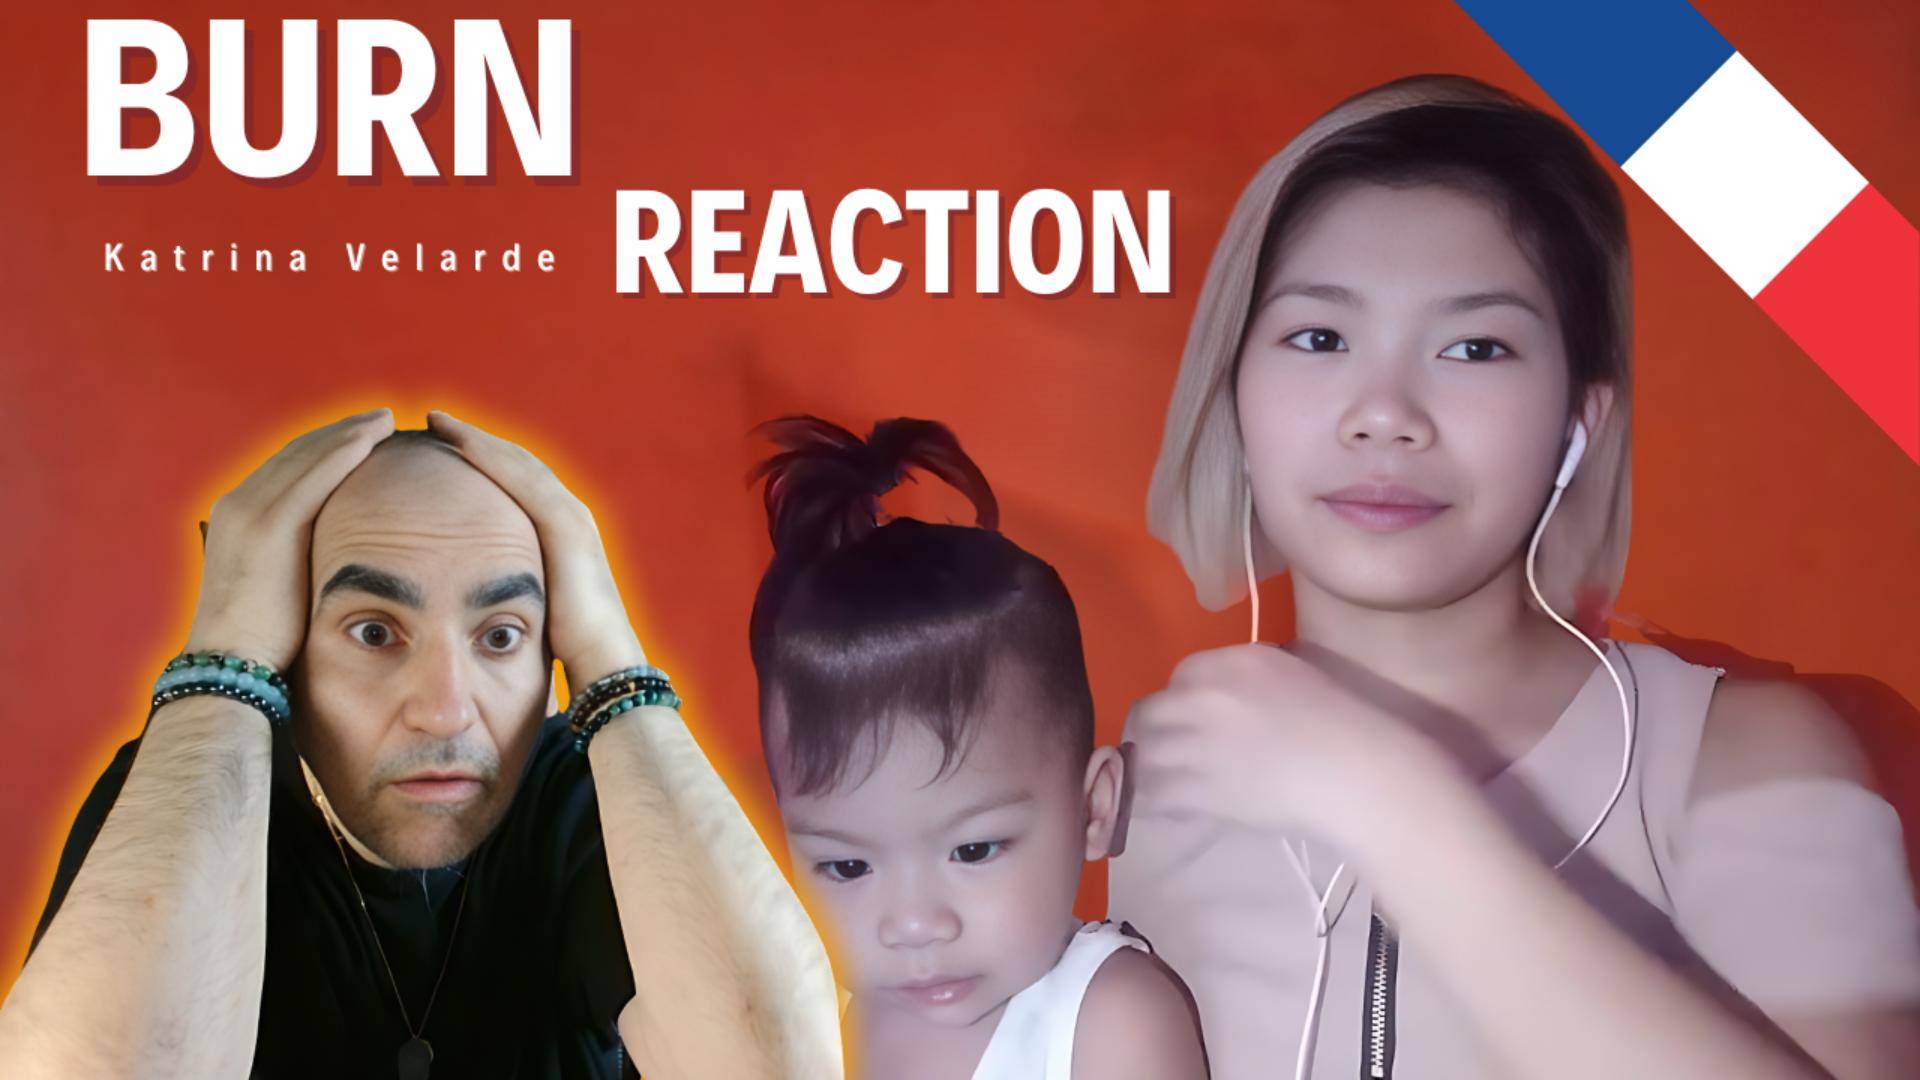 Катрина Веларде - Burn (Cover) - Impersonating Singers 3 ║ French Reaction!